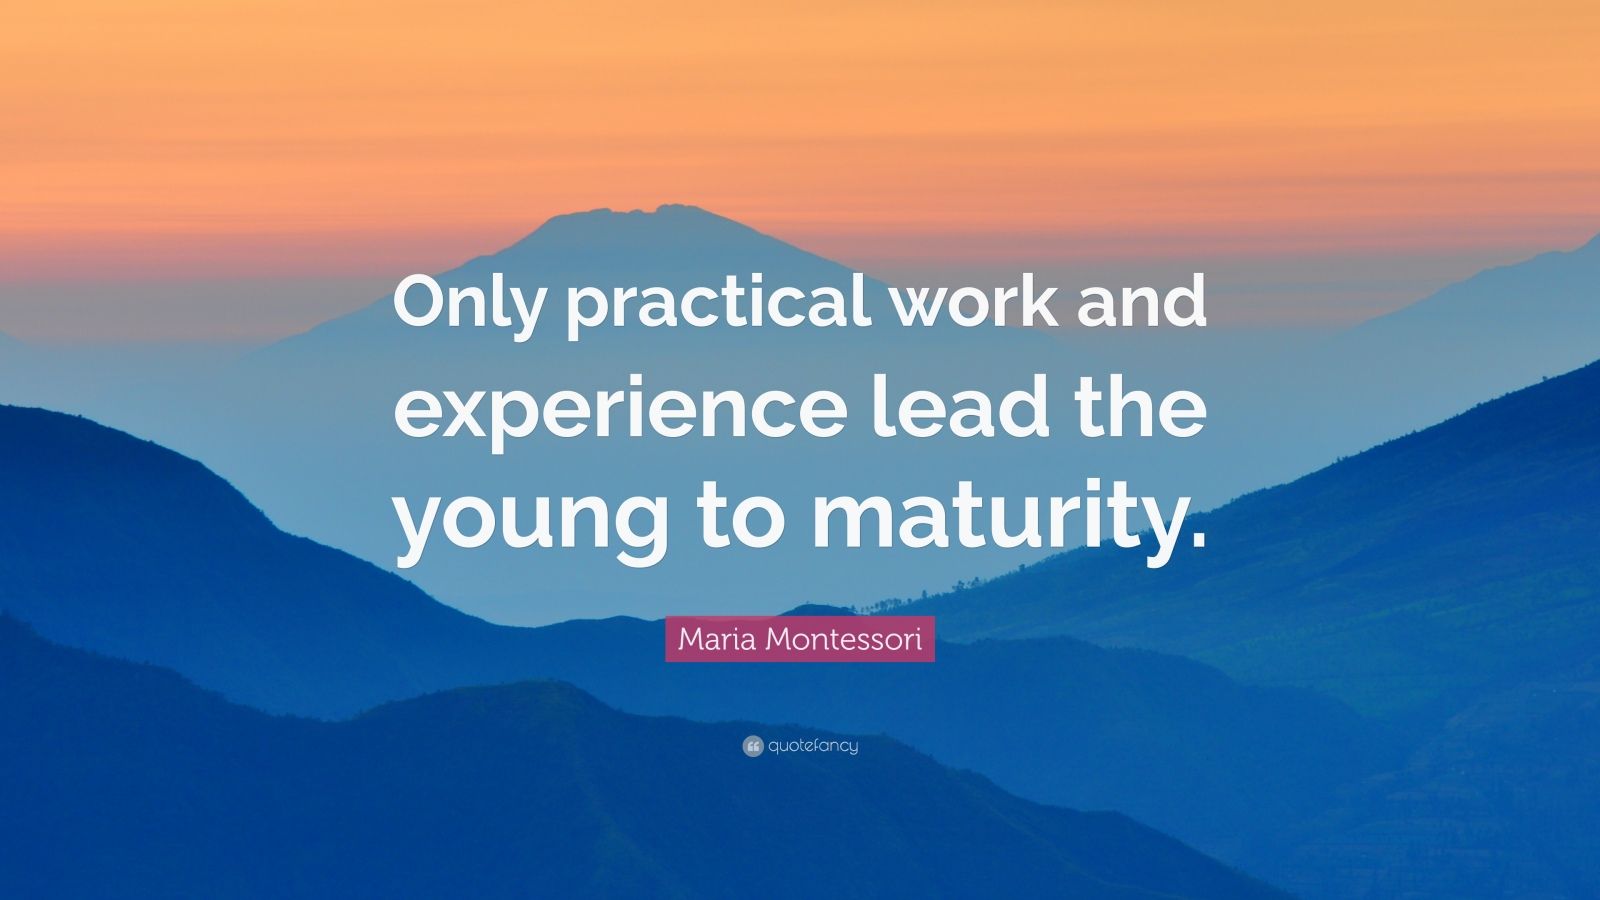 Maria Montessori Quote: “Only practical work and experience lead the